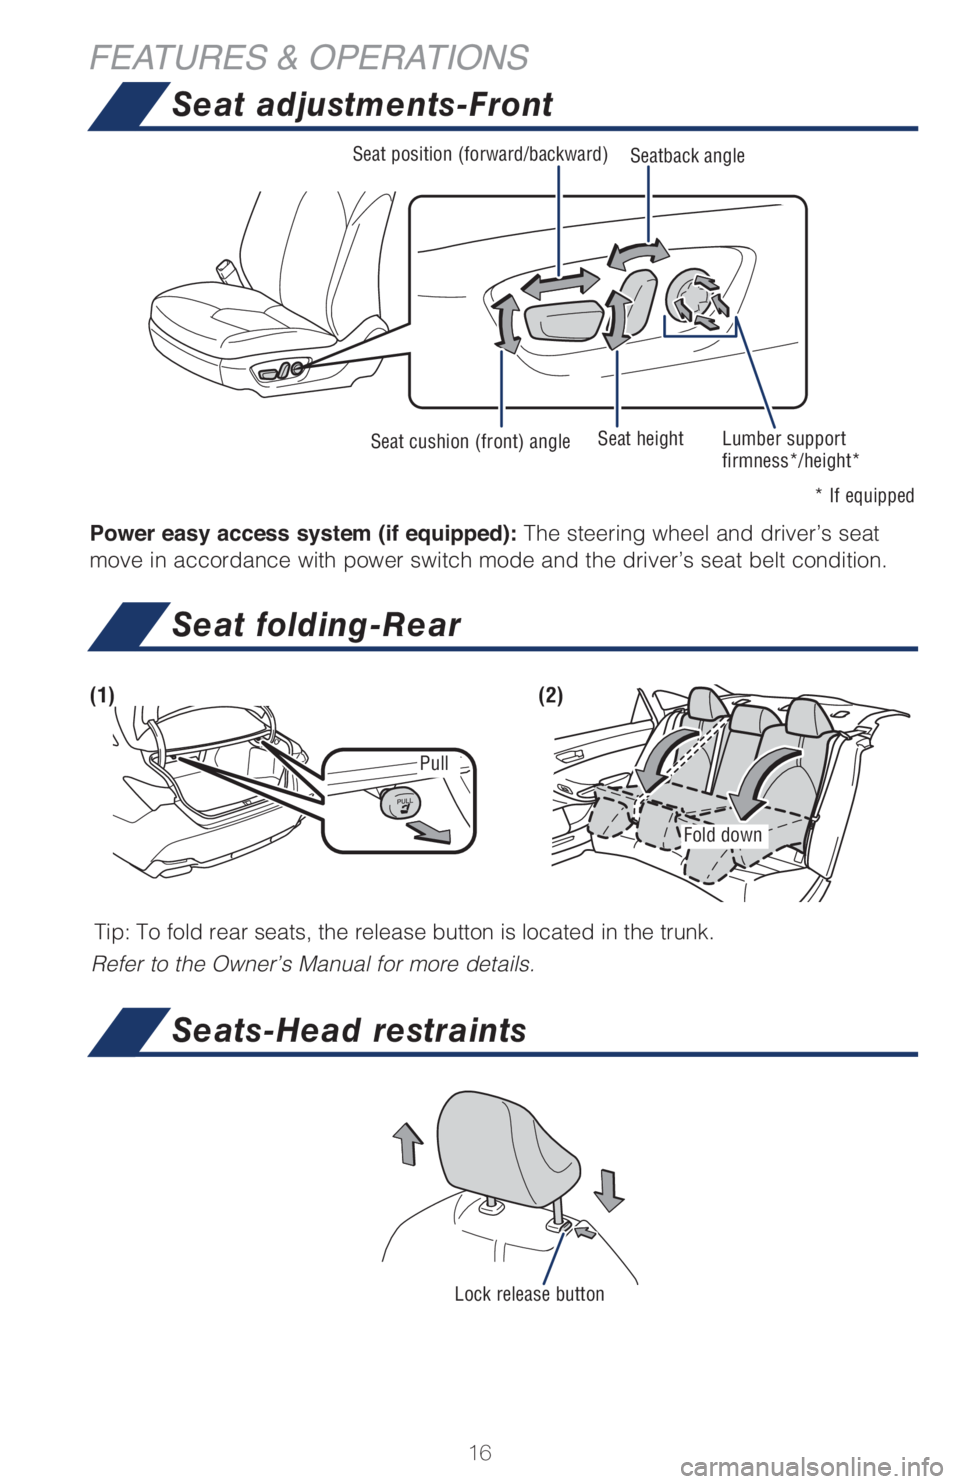 TOYOTA AVALON 2021  Owners Manual (in English) 16
FEATURES & OPERATIONS
Seat adjustments-Front
Seat position (forward/backward)
Seat cushion (front) angleSeat height
* If equipped Lumber support 
firmness*/height* Seatback angle
Seats-Head restrai